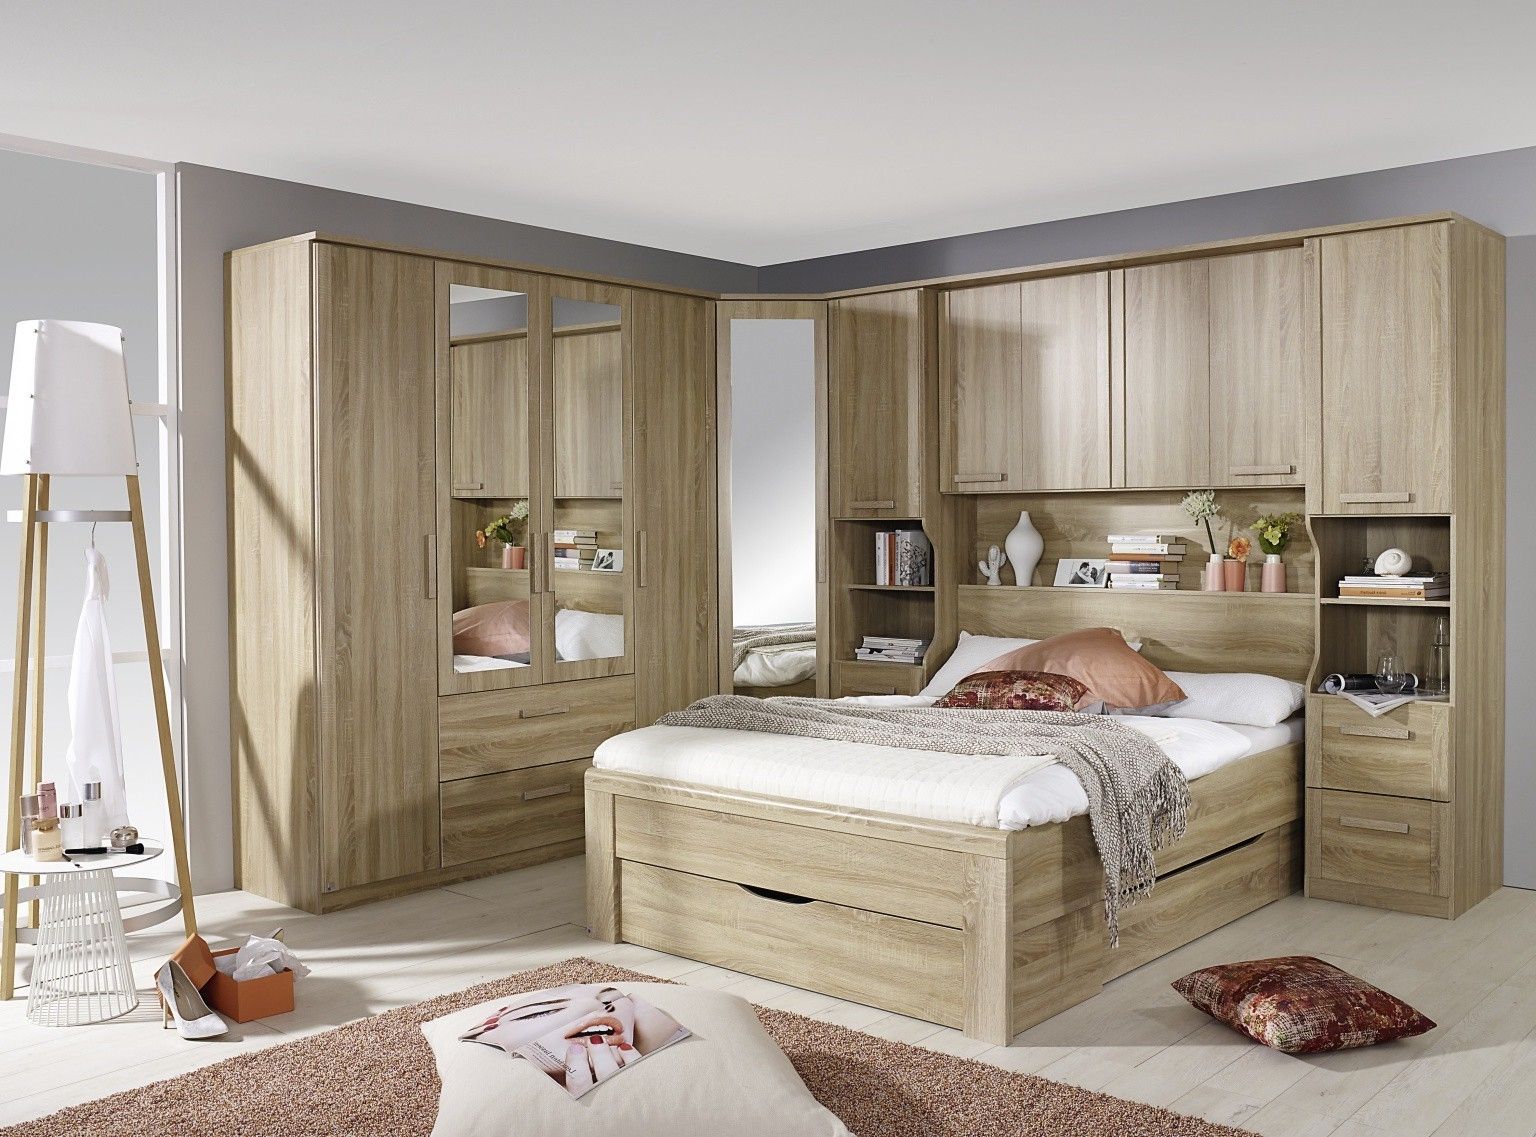 Oak Overbed Wardrobe Systems, Fitted Bedroom Furniture With Regard To Well Known Overbed Wardrobes (View 1 of 15)